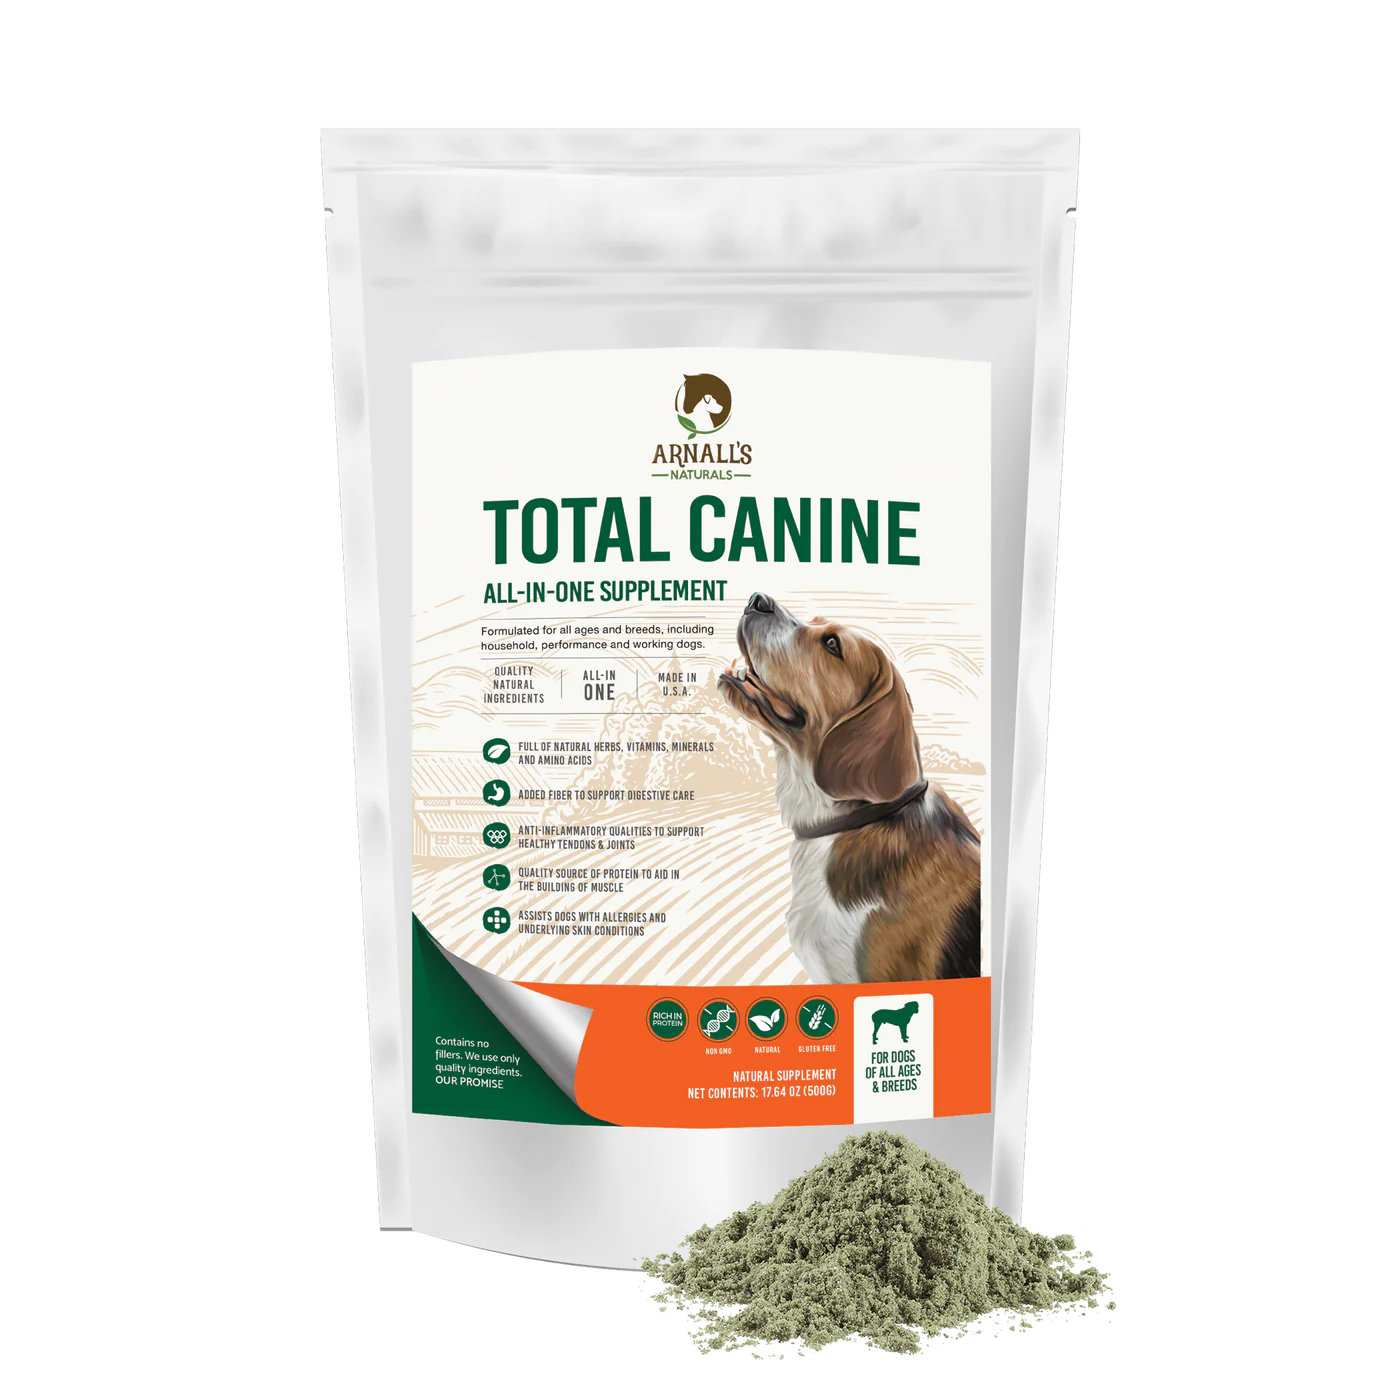 Arnall_s Naturals Total Canine